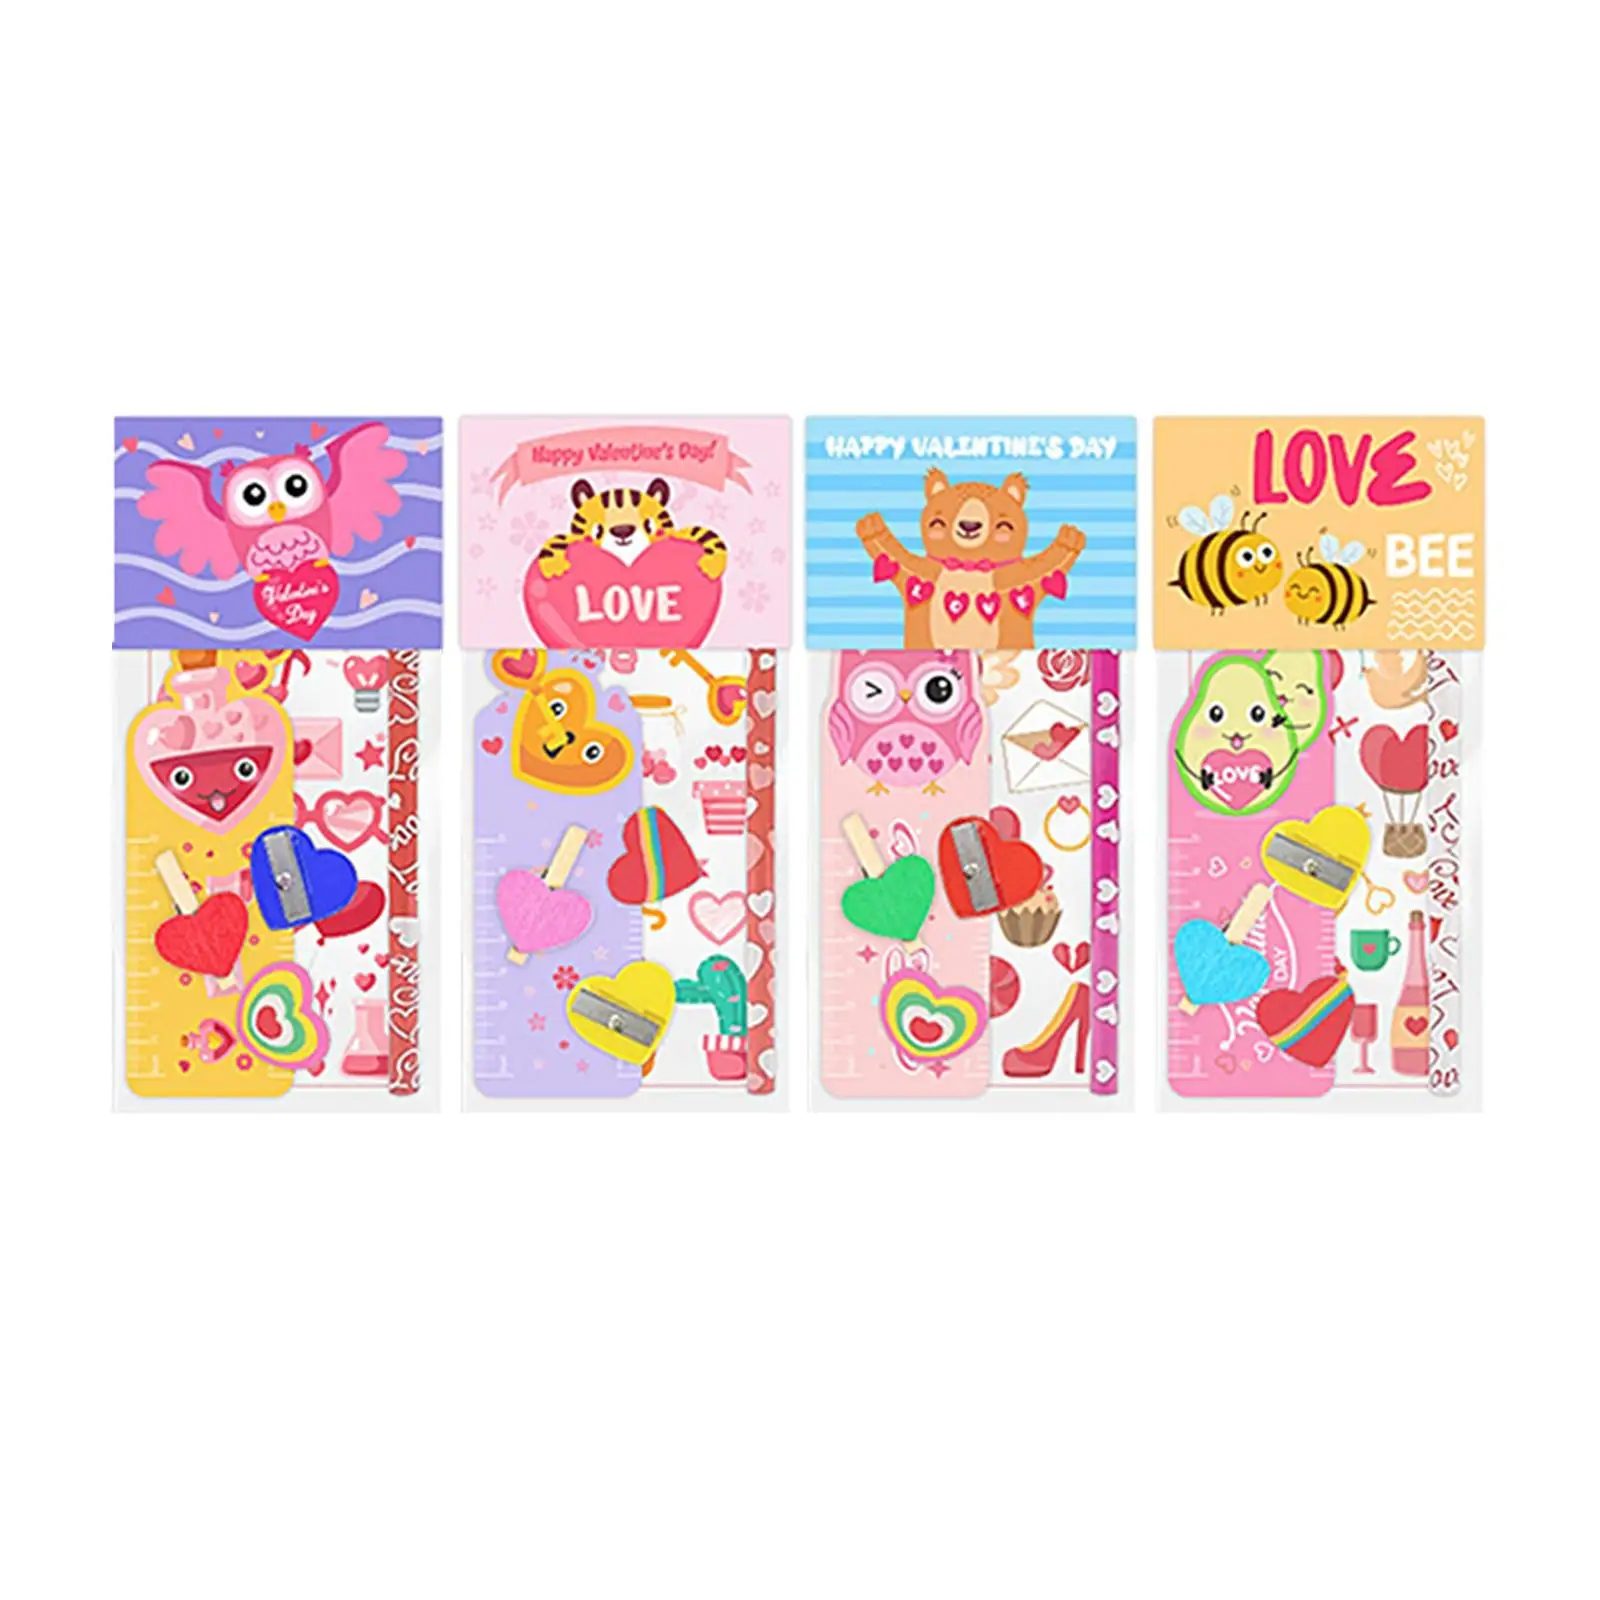 Valentines Day Stationery Set Valentine`s Day Party Favors Stationery Gift with Pencils for Friend Student Boys Children Kids